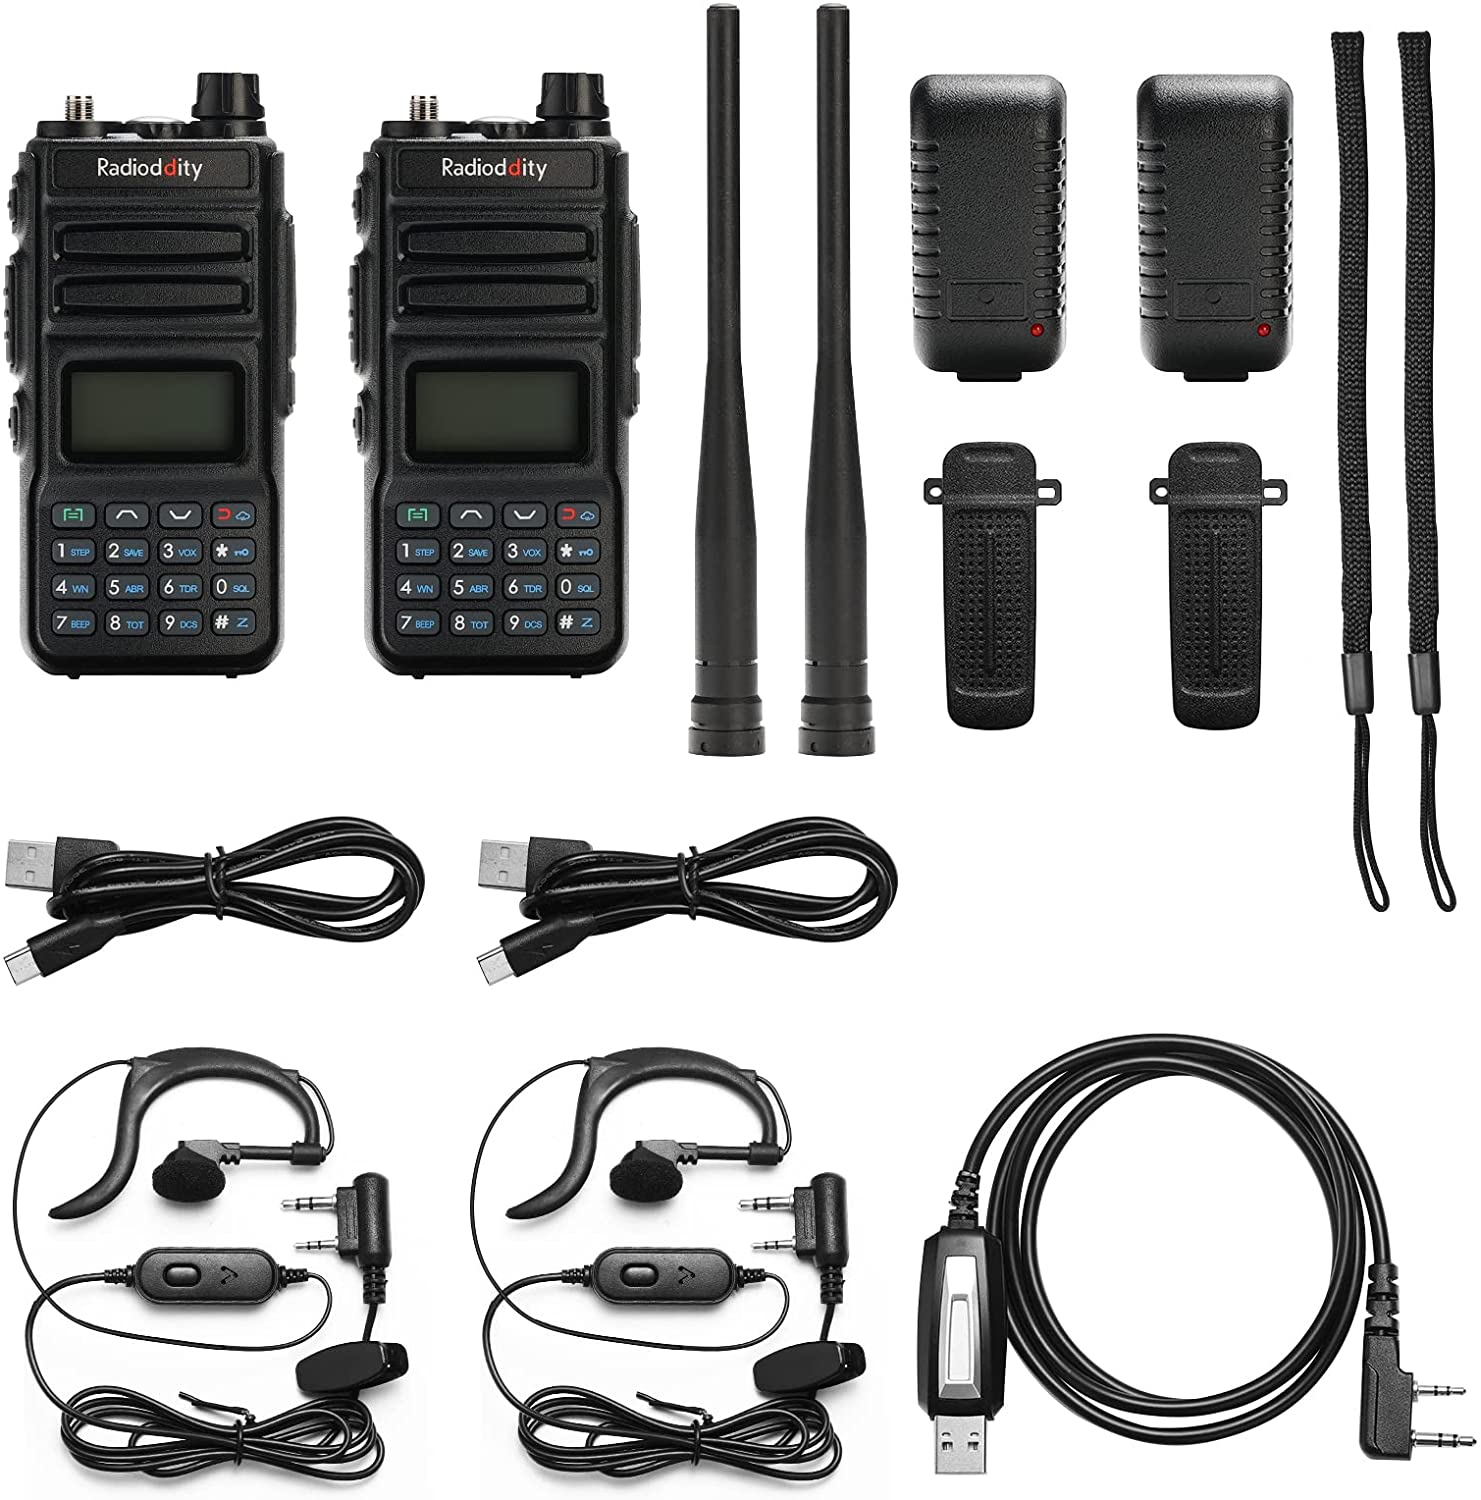 Radioddity GM-30 GMRS Radio, Pack Programming Cable, Handheld 5W Long  Range Two Way Radio for Adults, GMRS Repeater Capable, with NOAA Scanning   Receiving, Display SYNC, for Off Road Overlanding